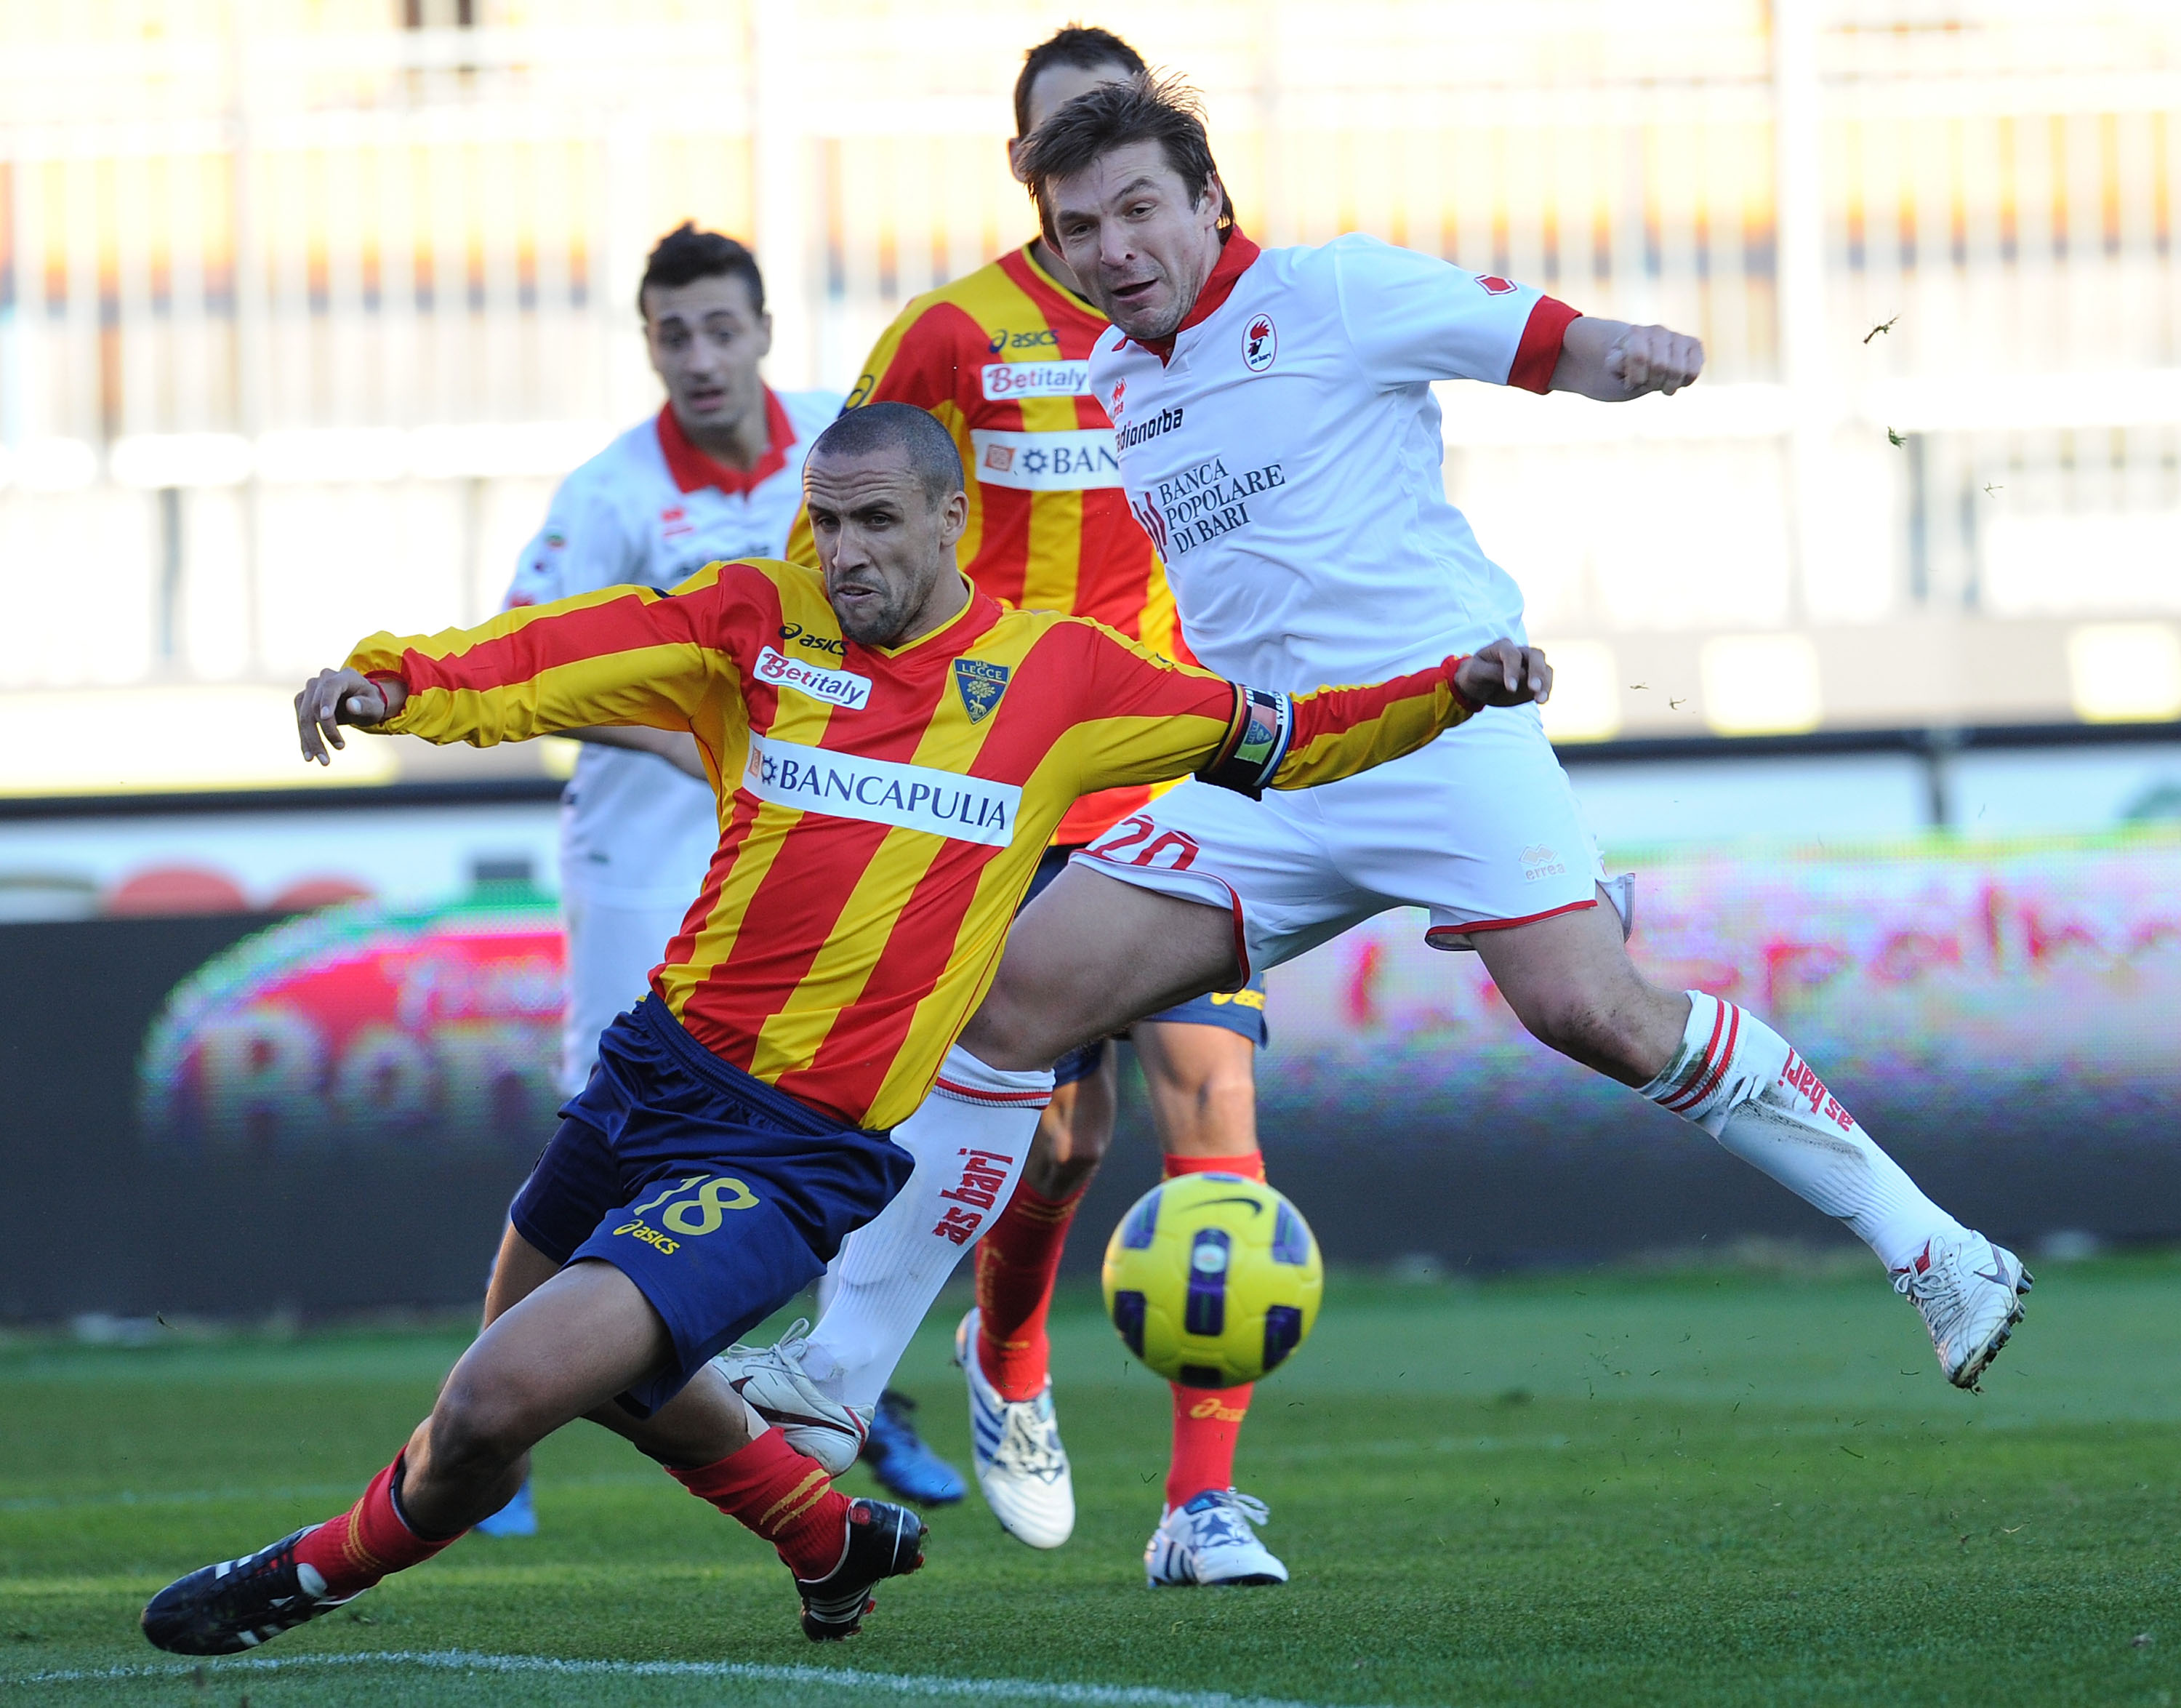 LECCE, ITALY - JANUARY 06:  Guillermo Giacomazzi of Lecce and Vitali Kutuzov of Bari  in action during the Serie A match between Lecce and Bari at Stadio Via del Mare on January 6, 2011 in Lecce, Italy.  (Photo by Giuseppe Bellini/Getty Images)